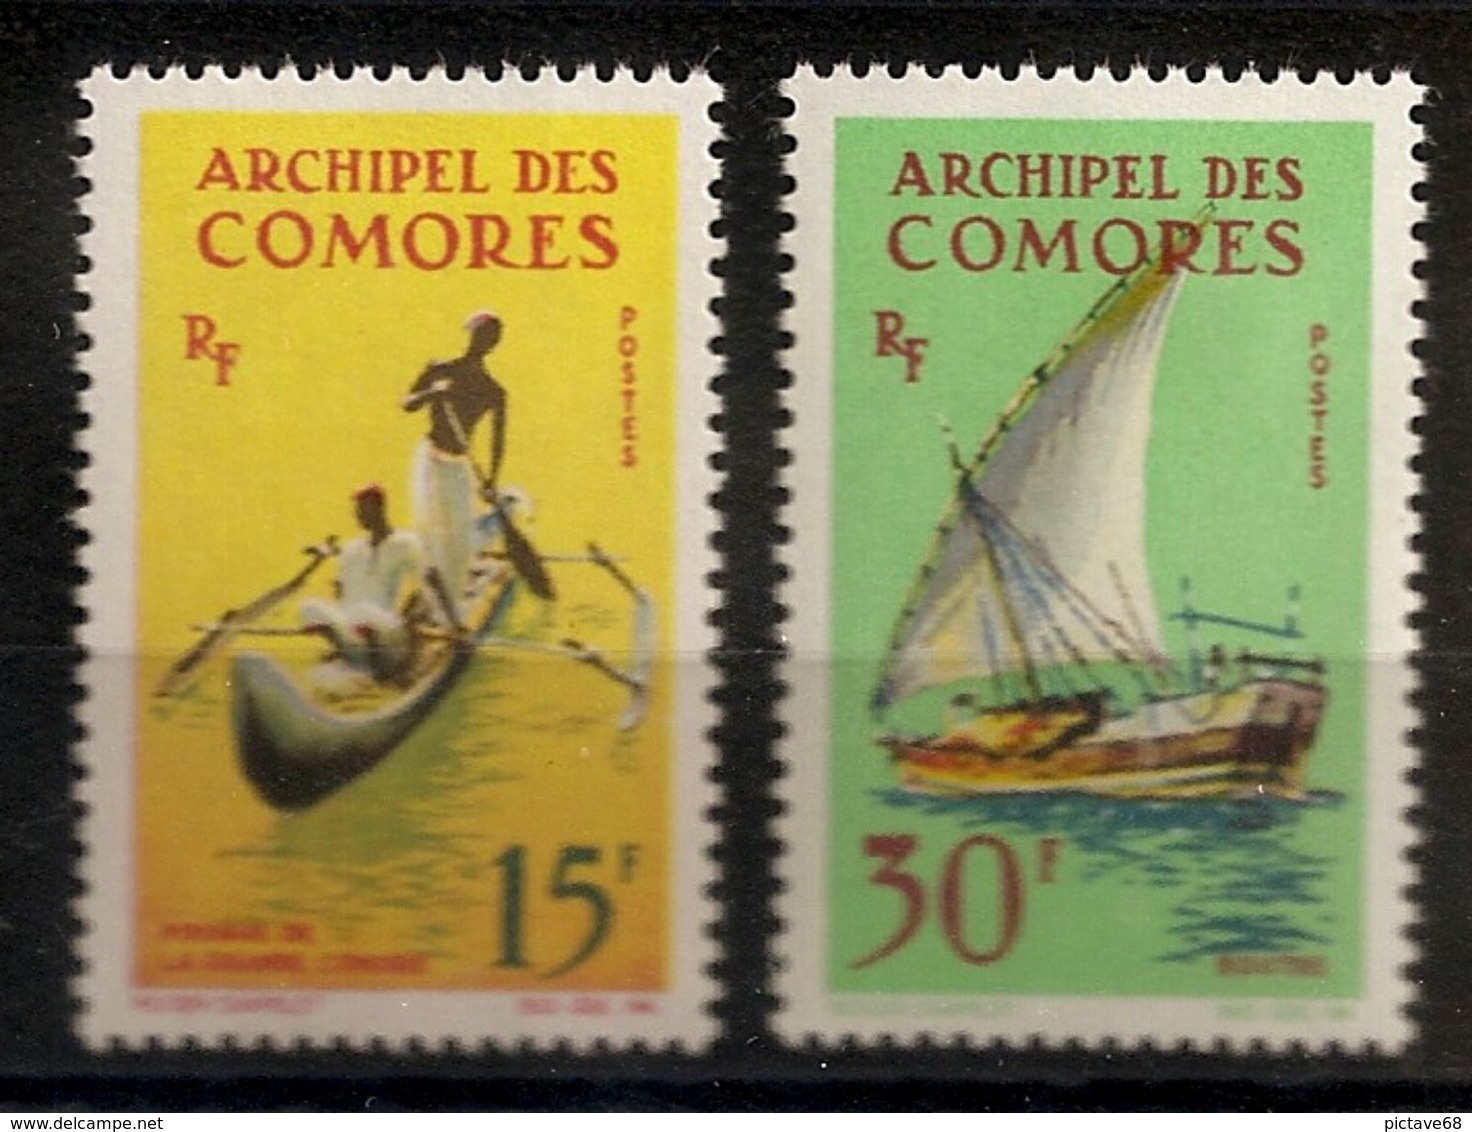 N° 33 & 34 NEUF AVEC CHARNIERE - Comores (1975-...)